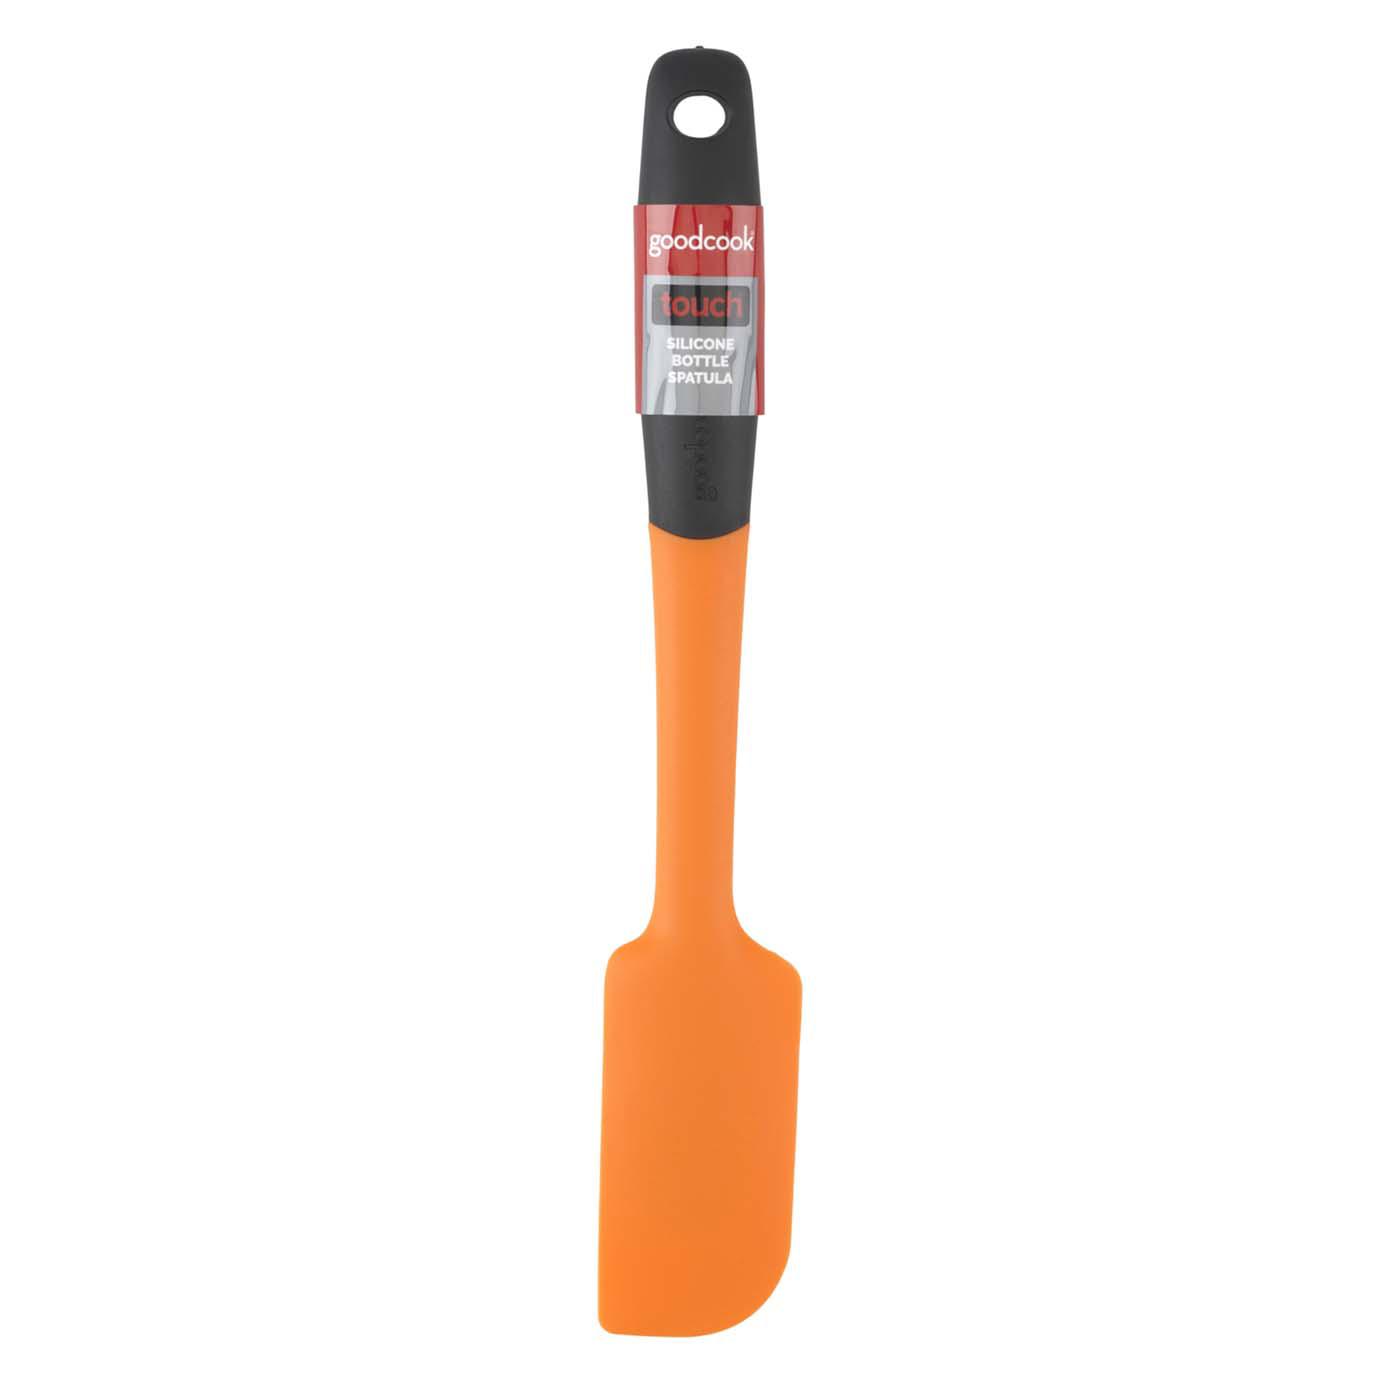 GoodCook Touch Silicone Bottle Spatula; image 1 of 2